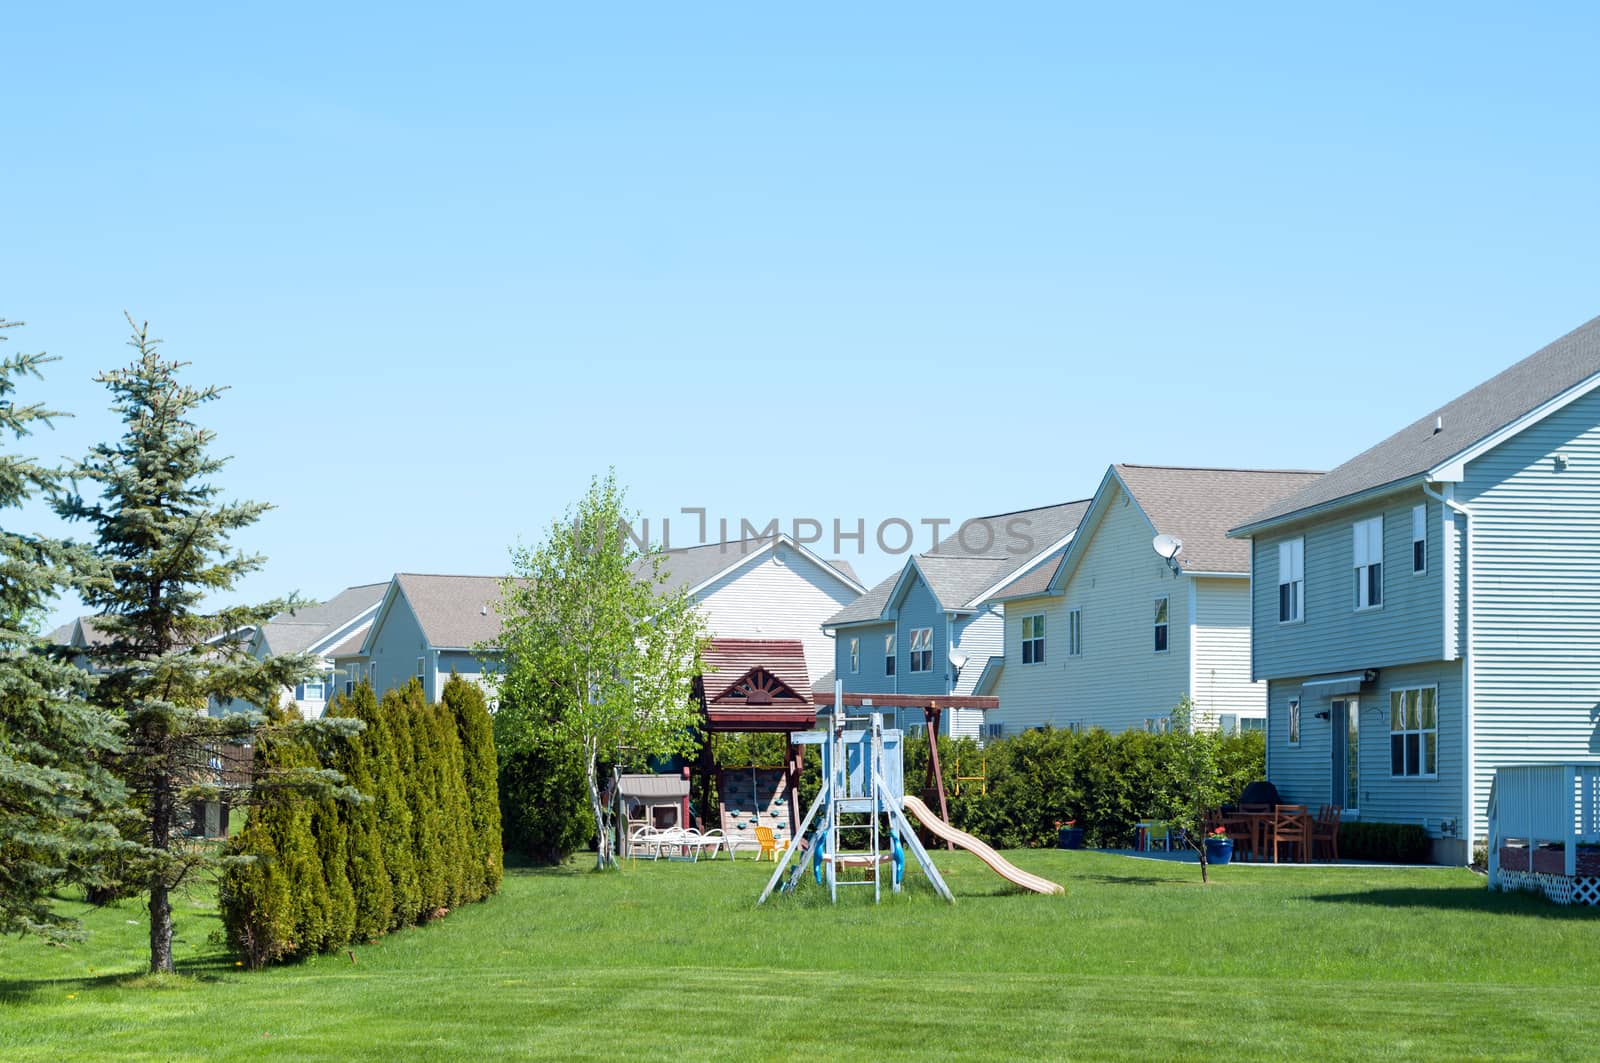 A typical American backyard with child playground during a sunny day